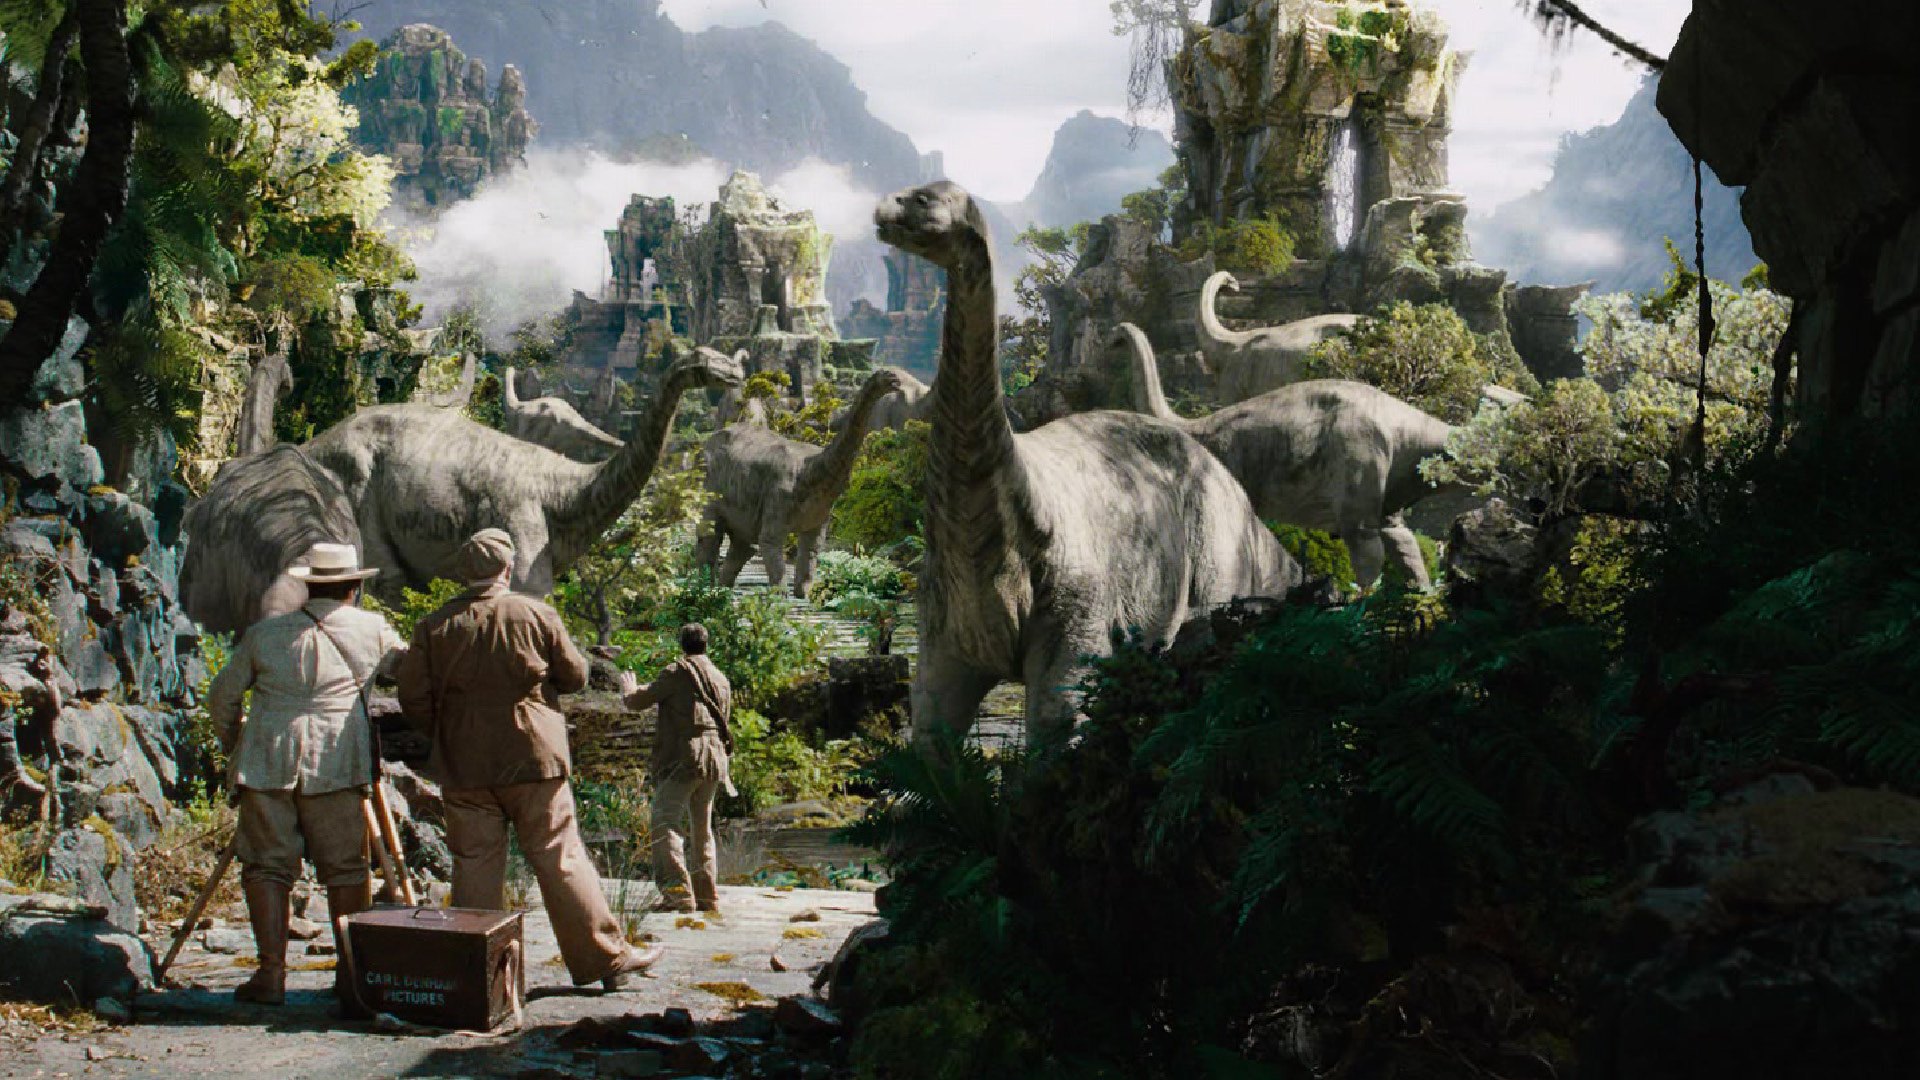 KING KONG film still of 3 explorers and dinosaurs